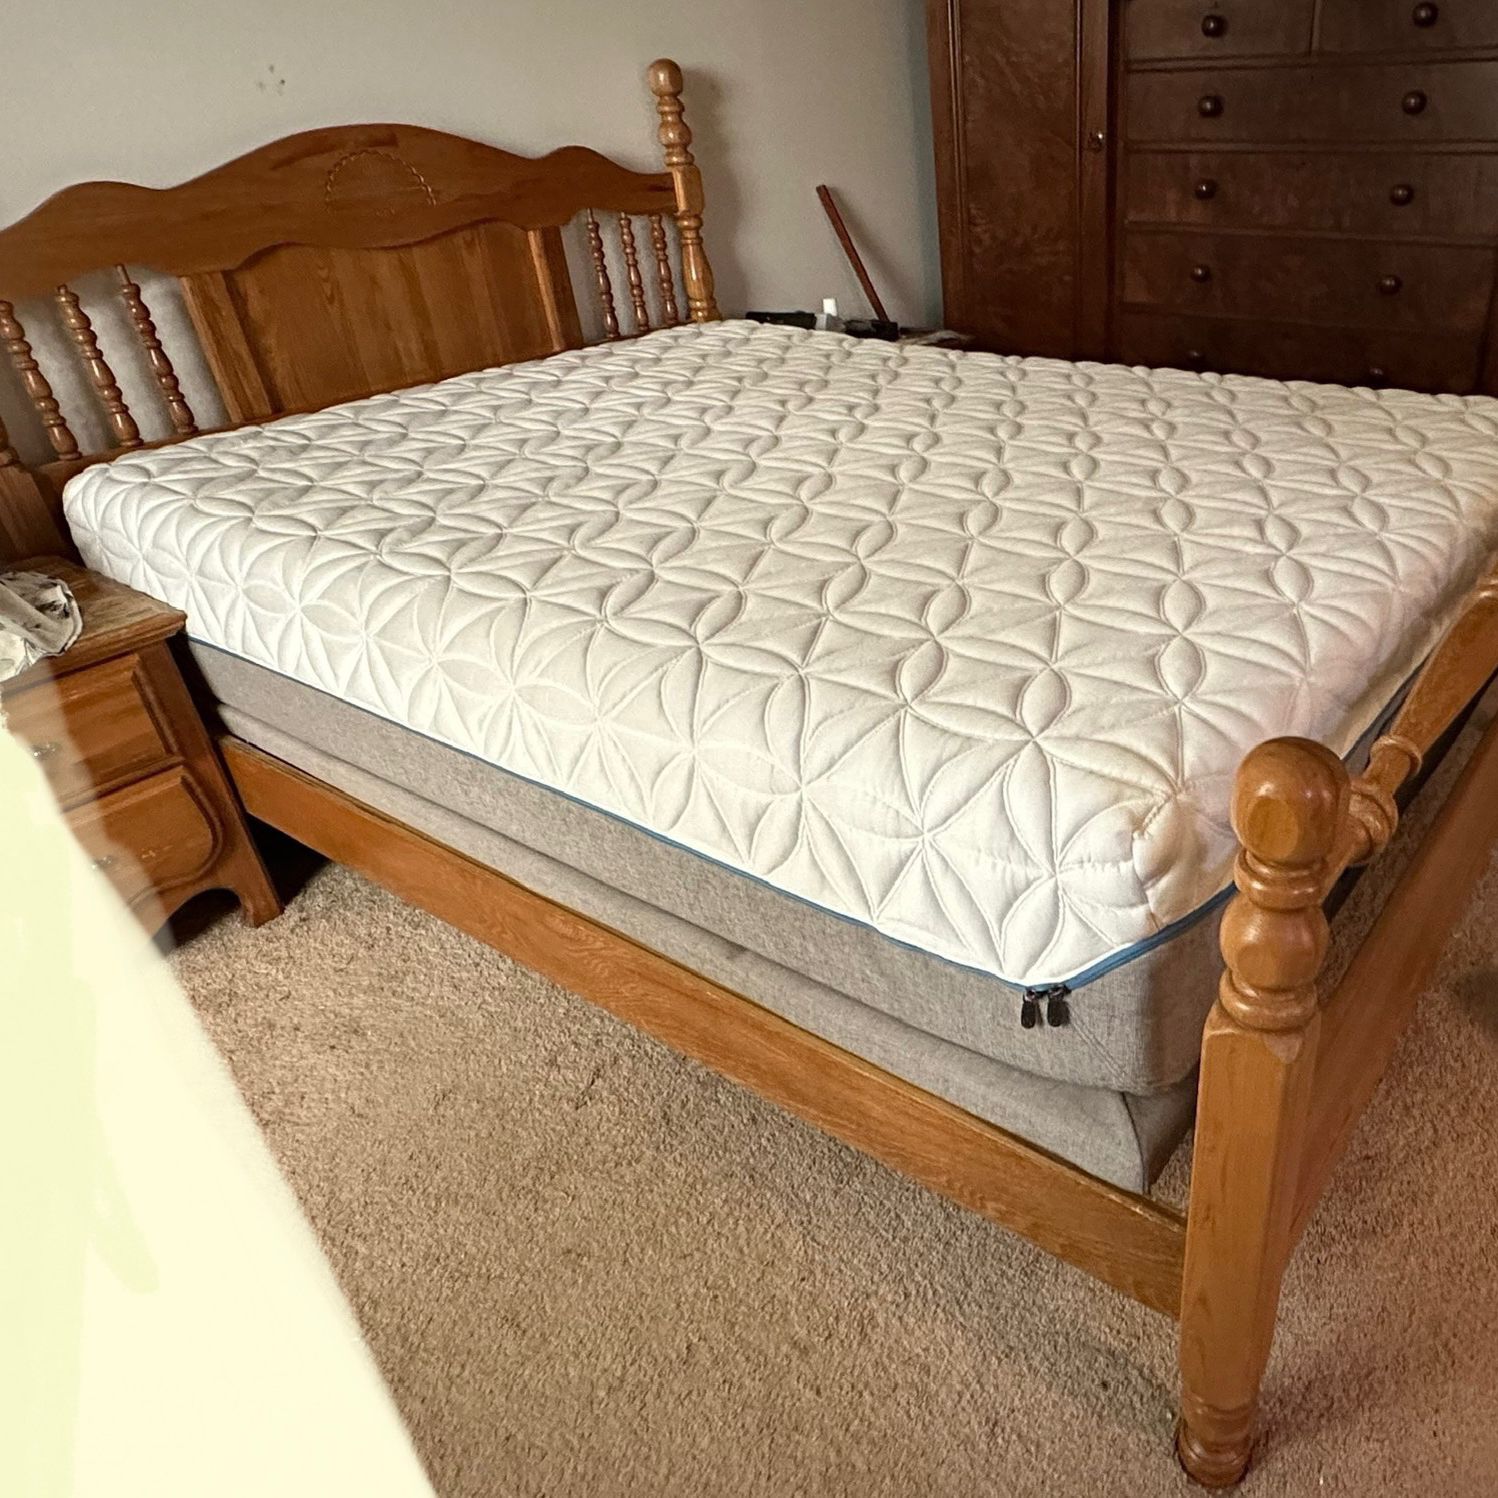 **Queen-sized Tempur-Pedic TEMPUR-Cloud Elite with electric-powered adjustable base and bed frame included for $2000 obo**